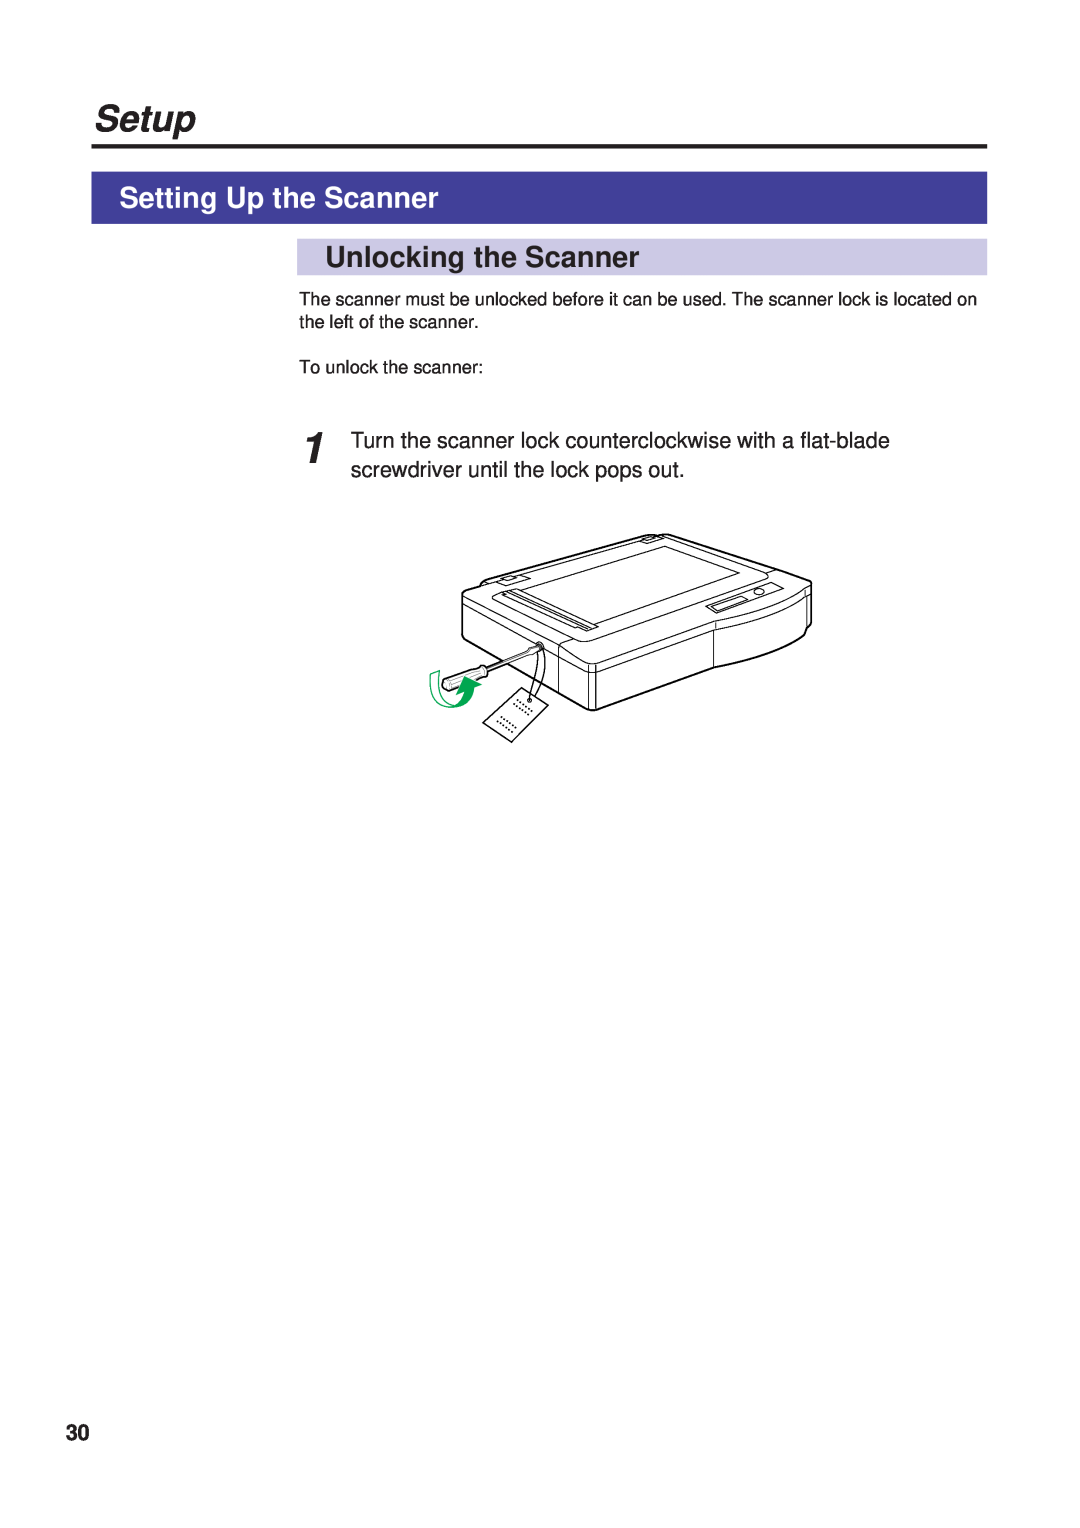 Panasonic KX-PS8000 manual Setting Up the Scanner, Unlocking the Scanner, screwdriver until the lock pops out, Setup 